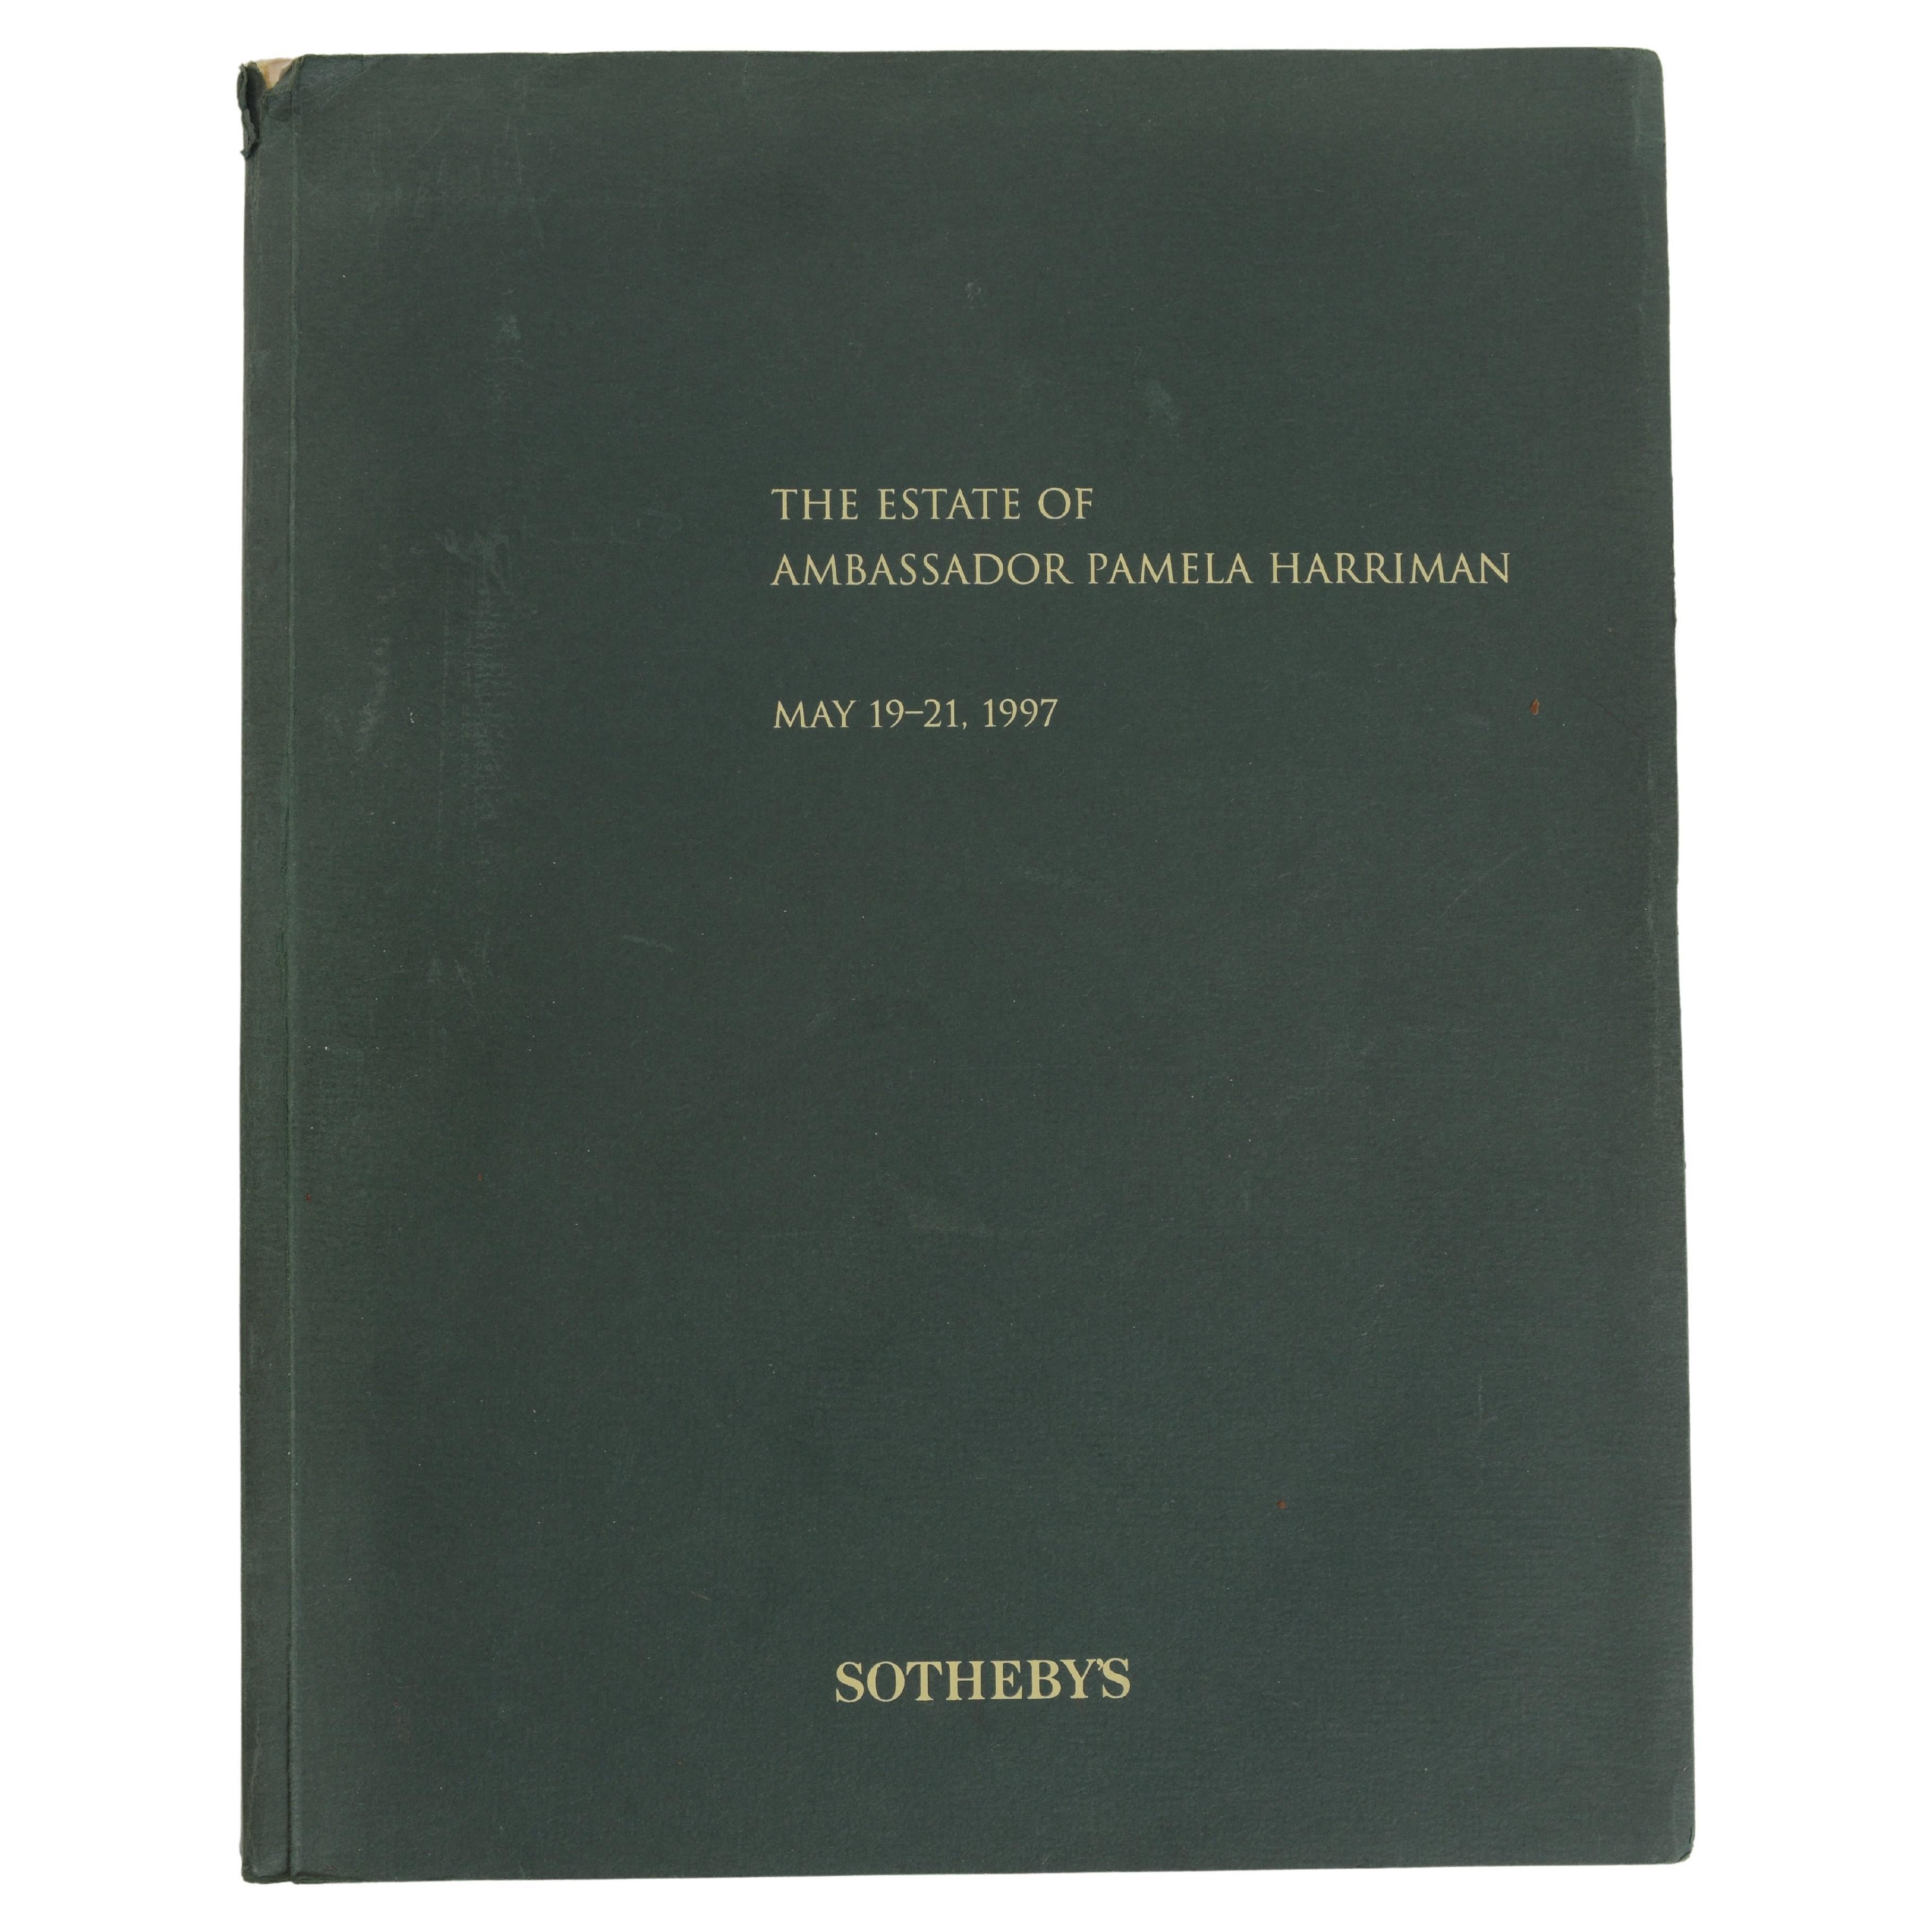 Auction catalogue from The Estate of Ambassador Pamela Harriman, May 19-21, 1997. New York: Sotheby's, 1997. First edition hardcover with dust jacket and results, 478 pp. A beautiful hardcover auction catalogue from Sotheby's auction of the Pamela